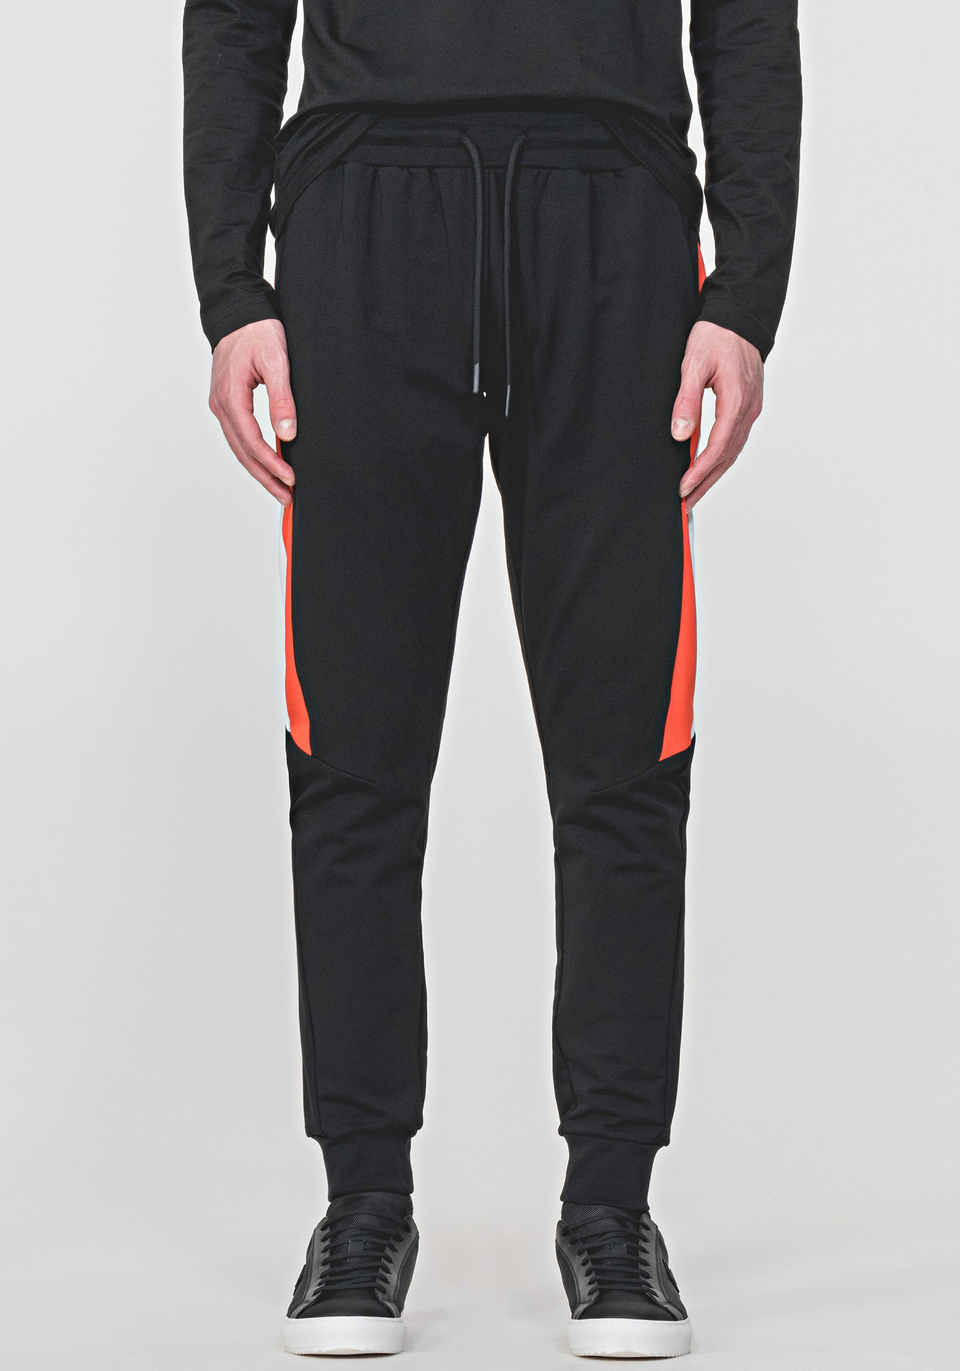 COTTON JOGGERS WITH CONTRASTING BANDS ON THE SIDES - Antony Morato Online Shop